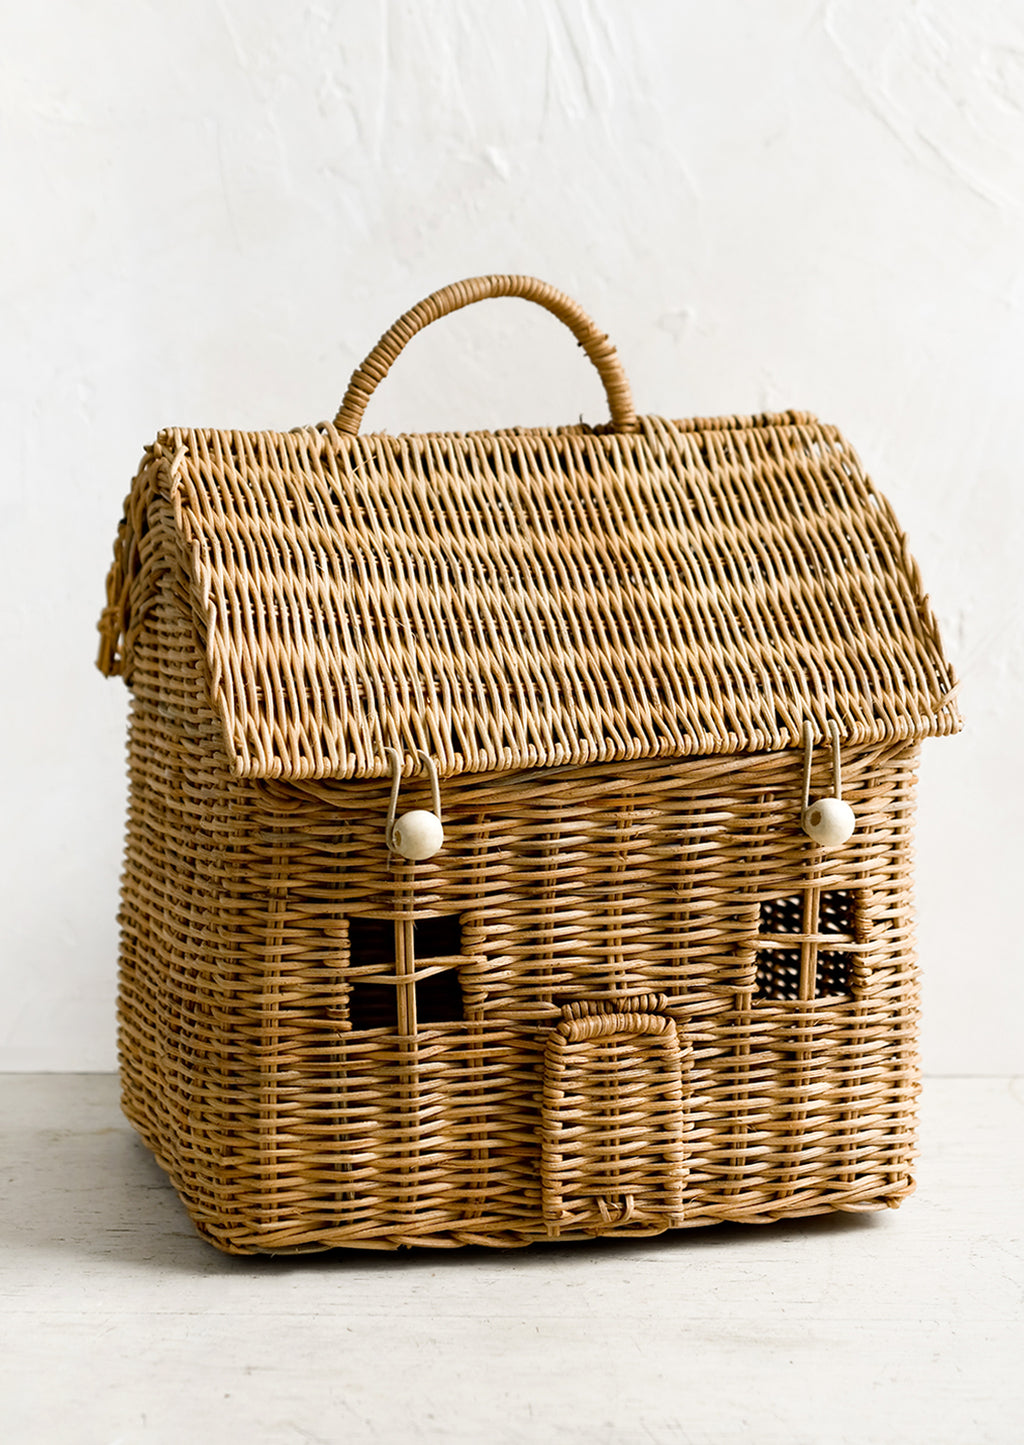 1: A rattan storage basket in the shape of a house.